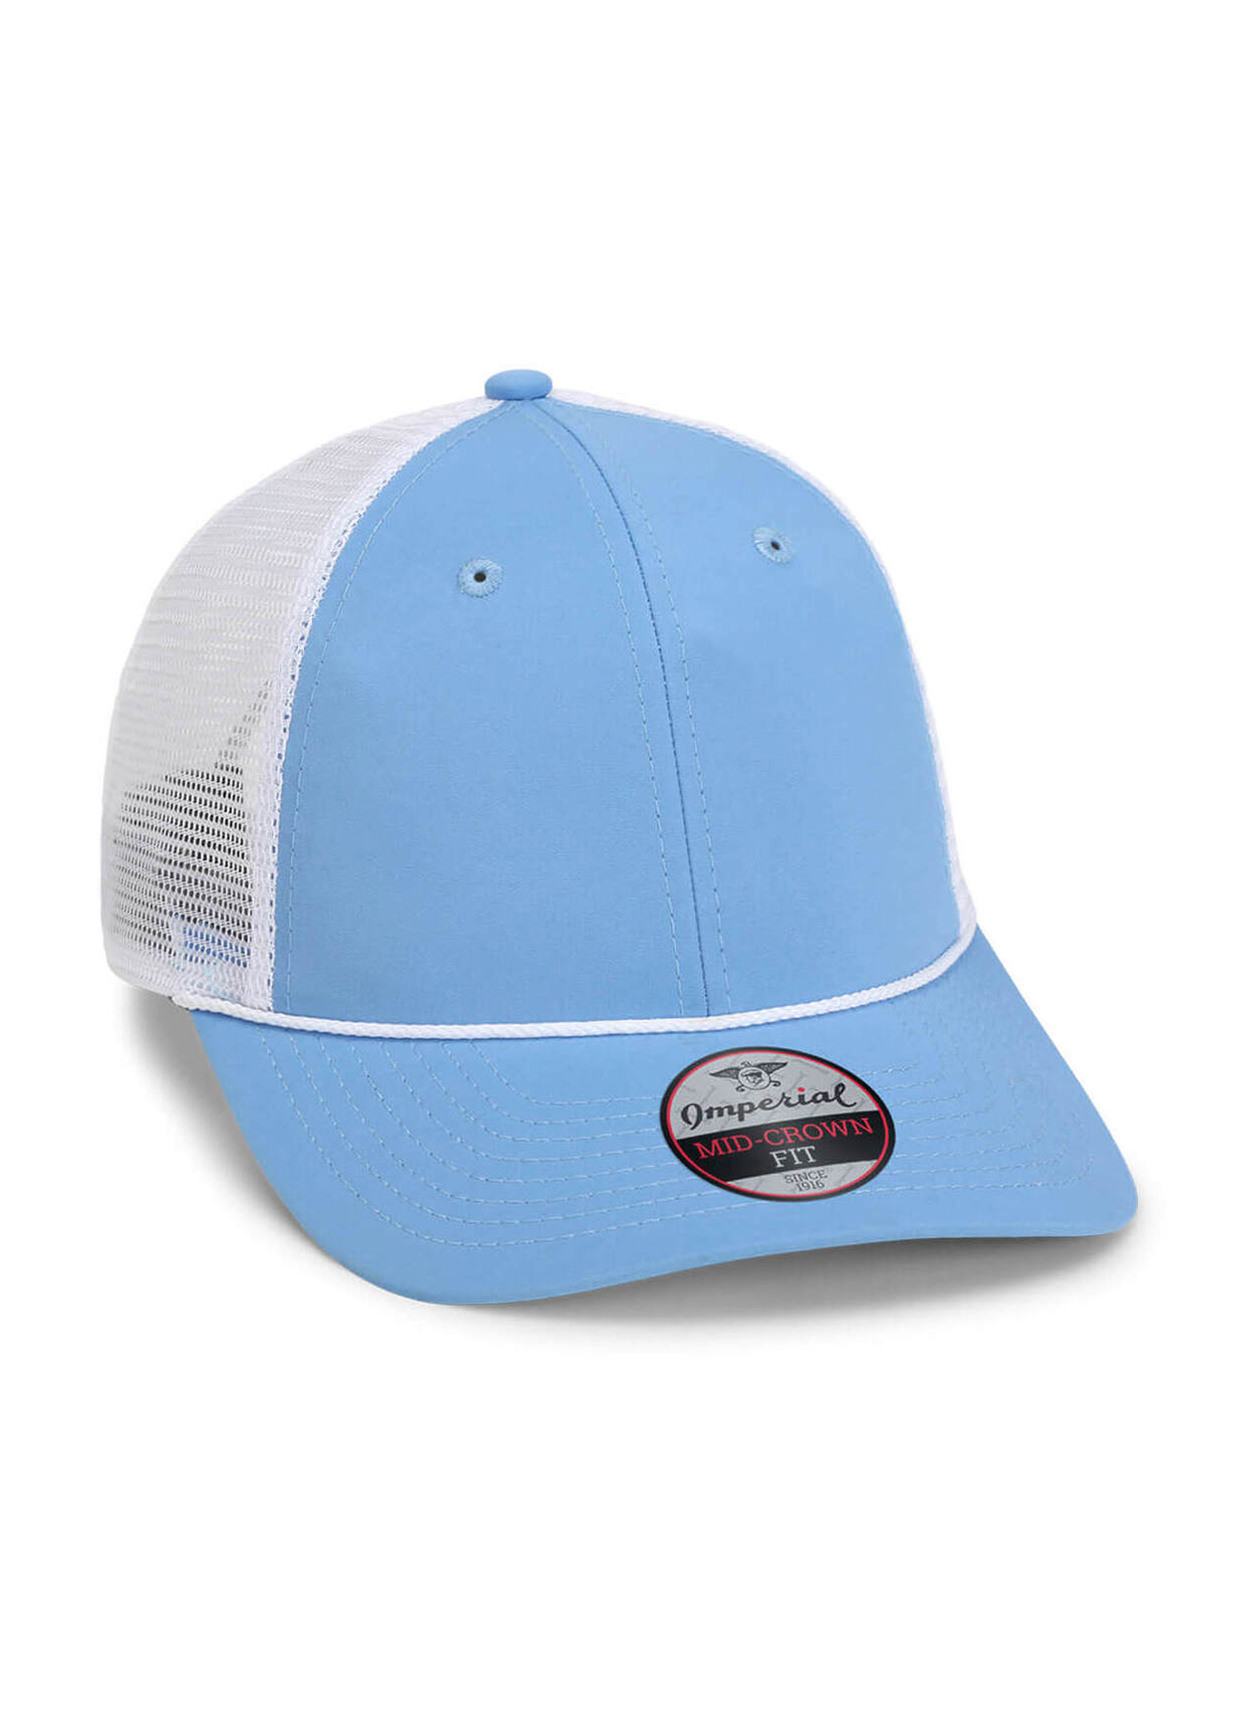 Imperial Powder Blue / White The Night Owl Mesh Back Performance Hat